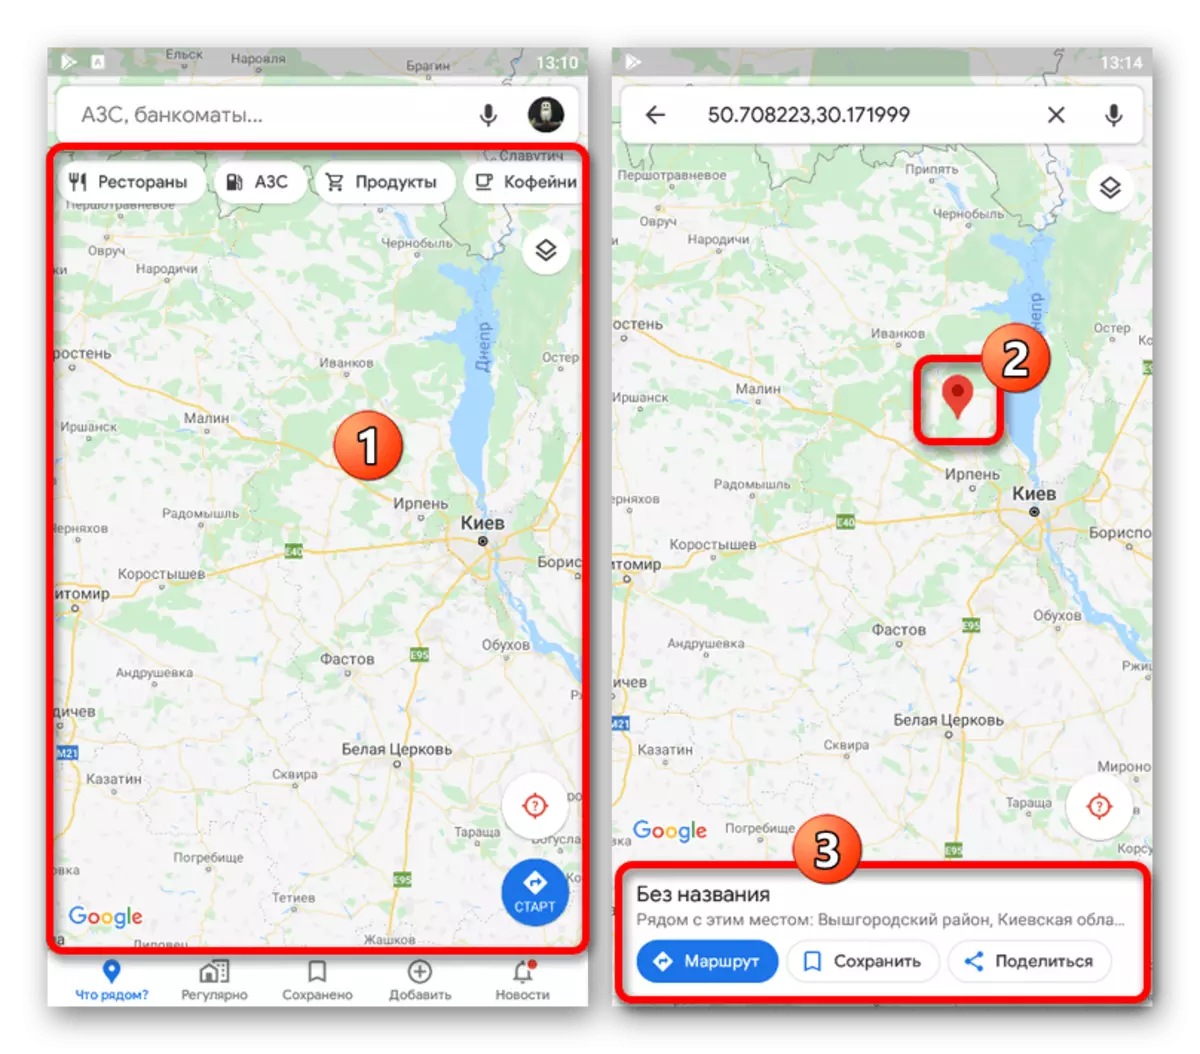 Adding a new mark on the map in the Google Maps application